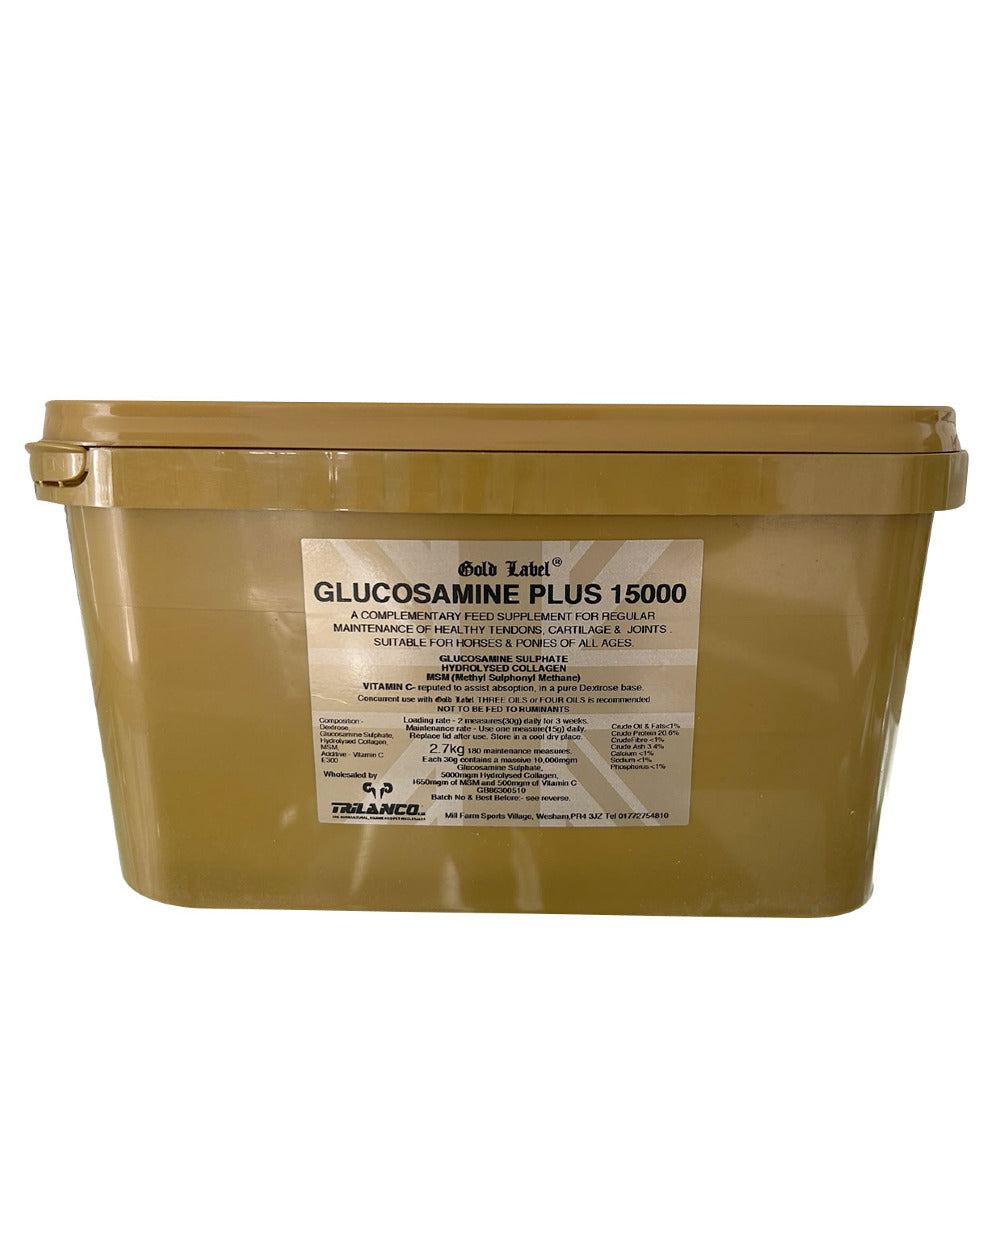 Gold Label Glucosamine Plus 15000 On A White Background